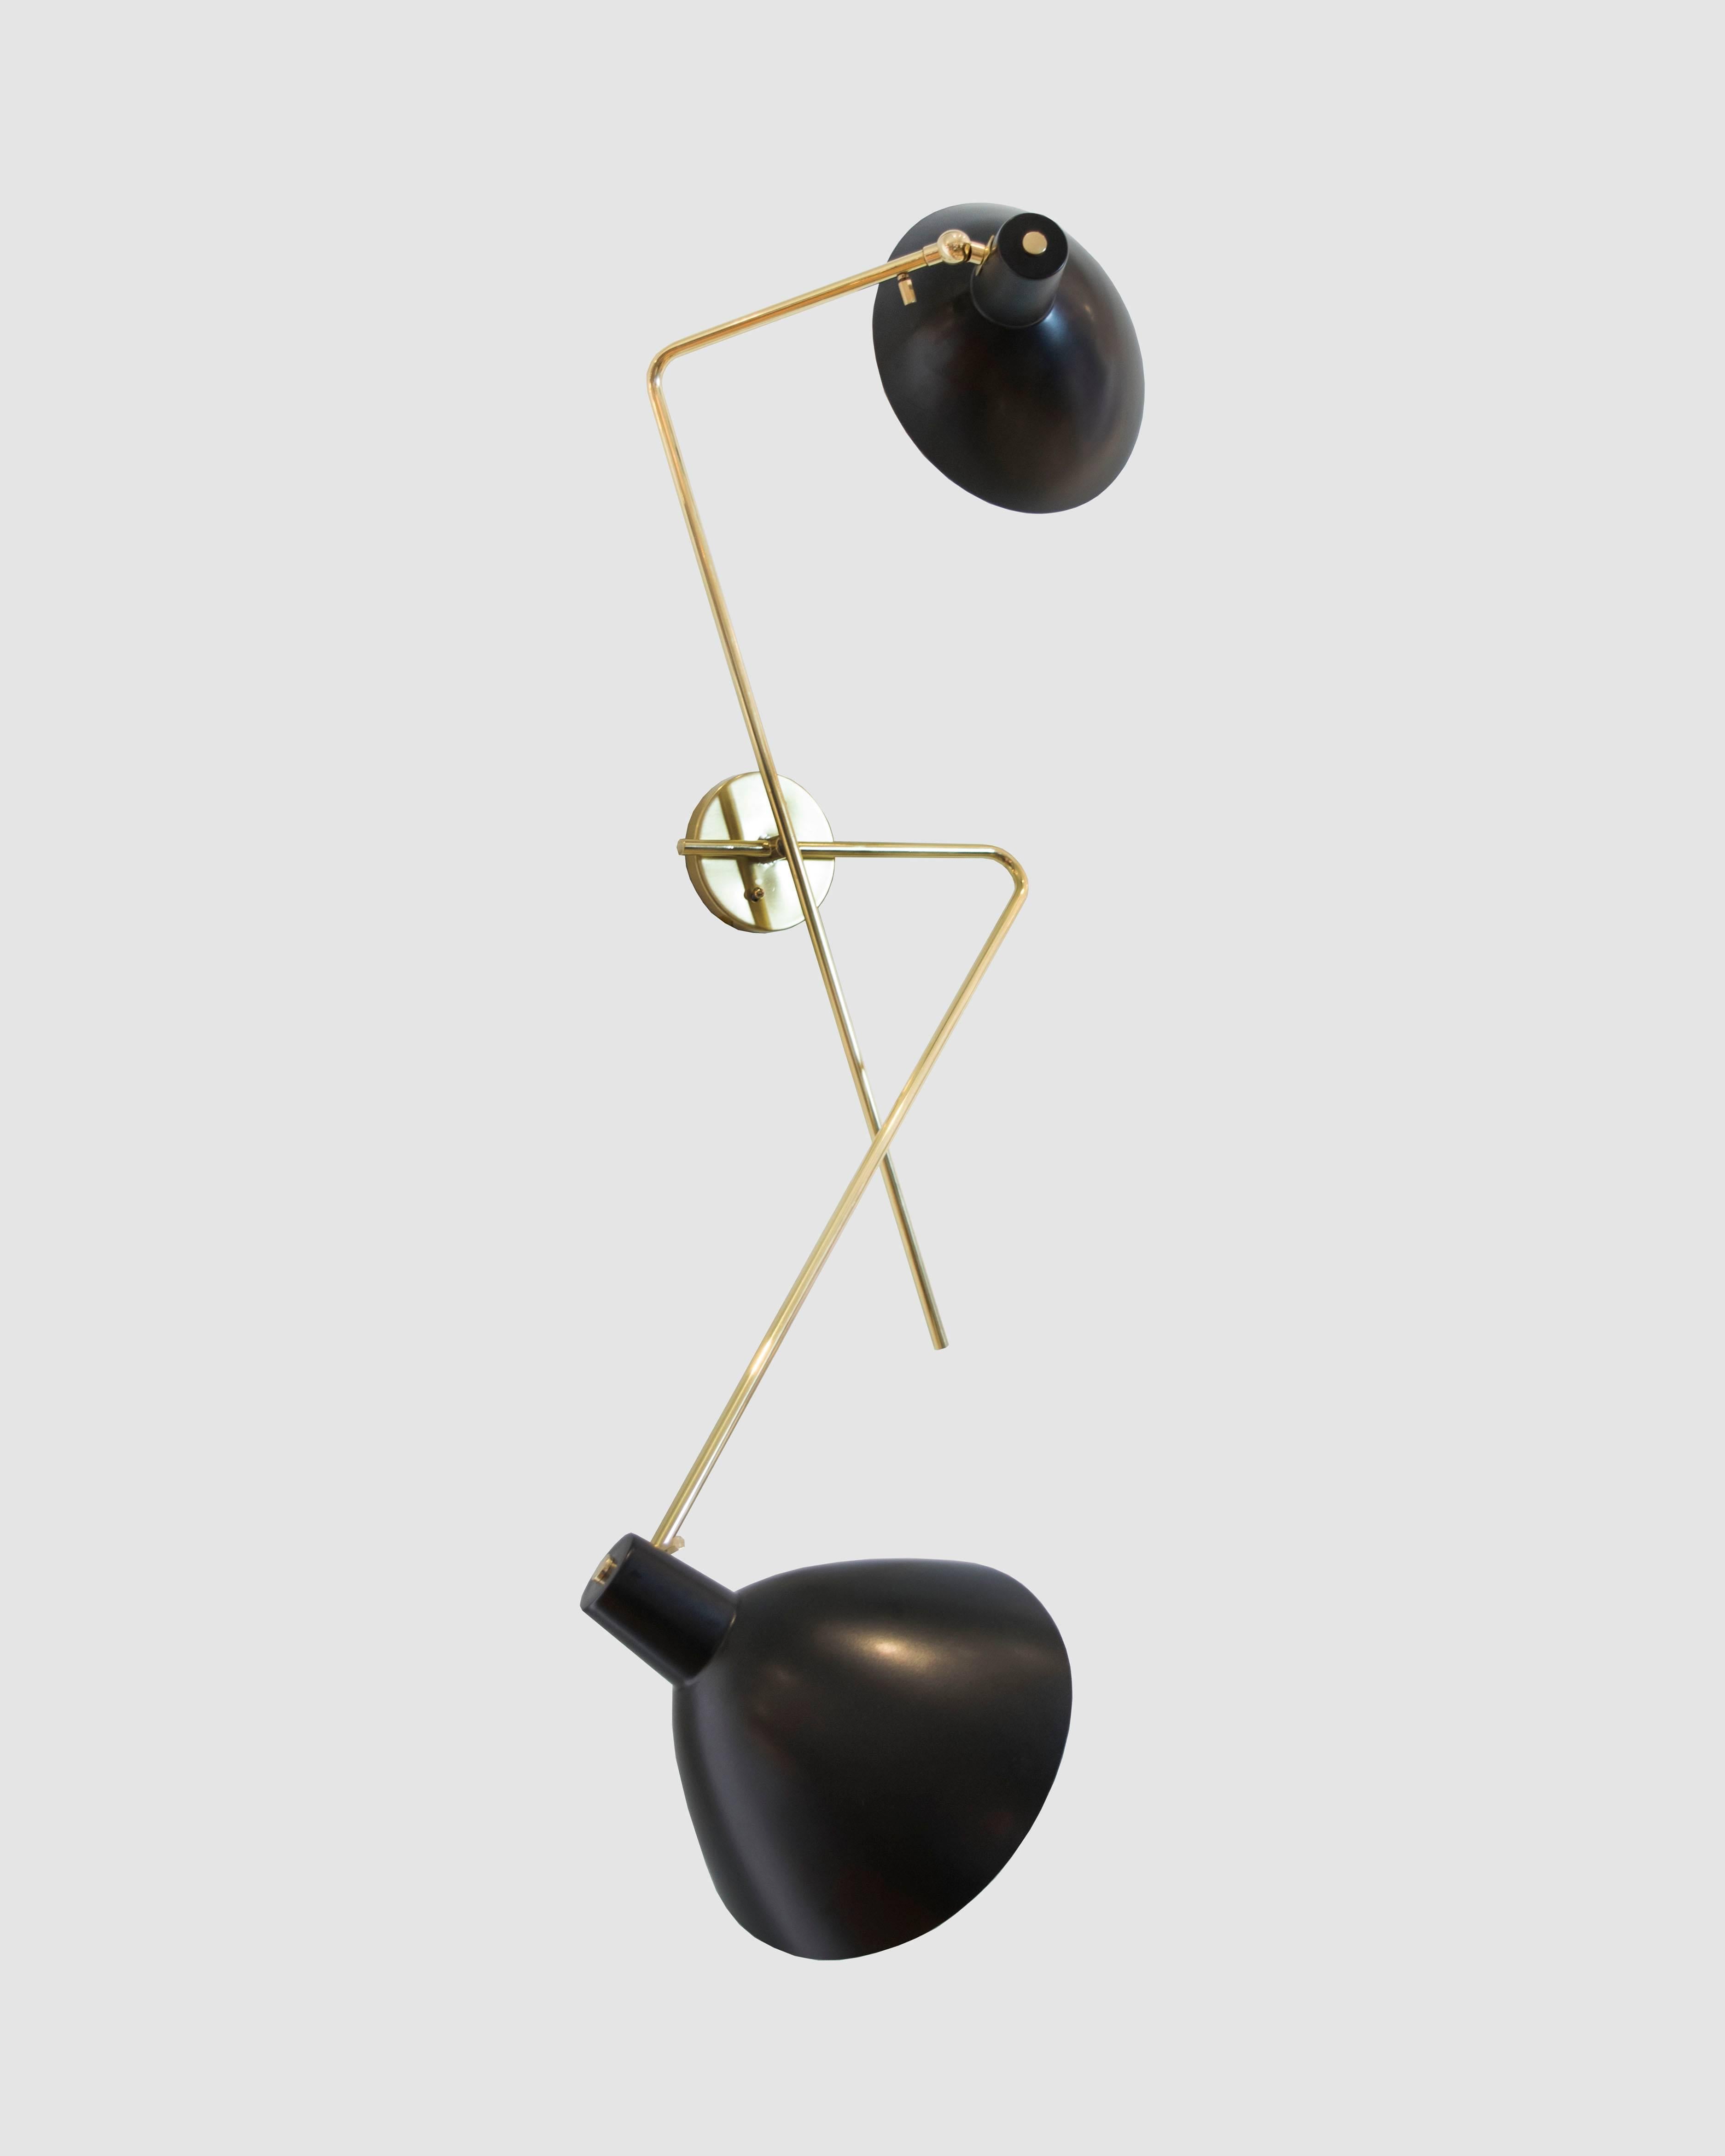 This is an absolutely breathtaking and rare design by Vittoriano Vigano in pure brass and black powder coated metal. An oversized wall light with adjustable sconces for reading lights or reflection.